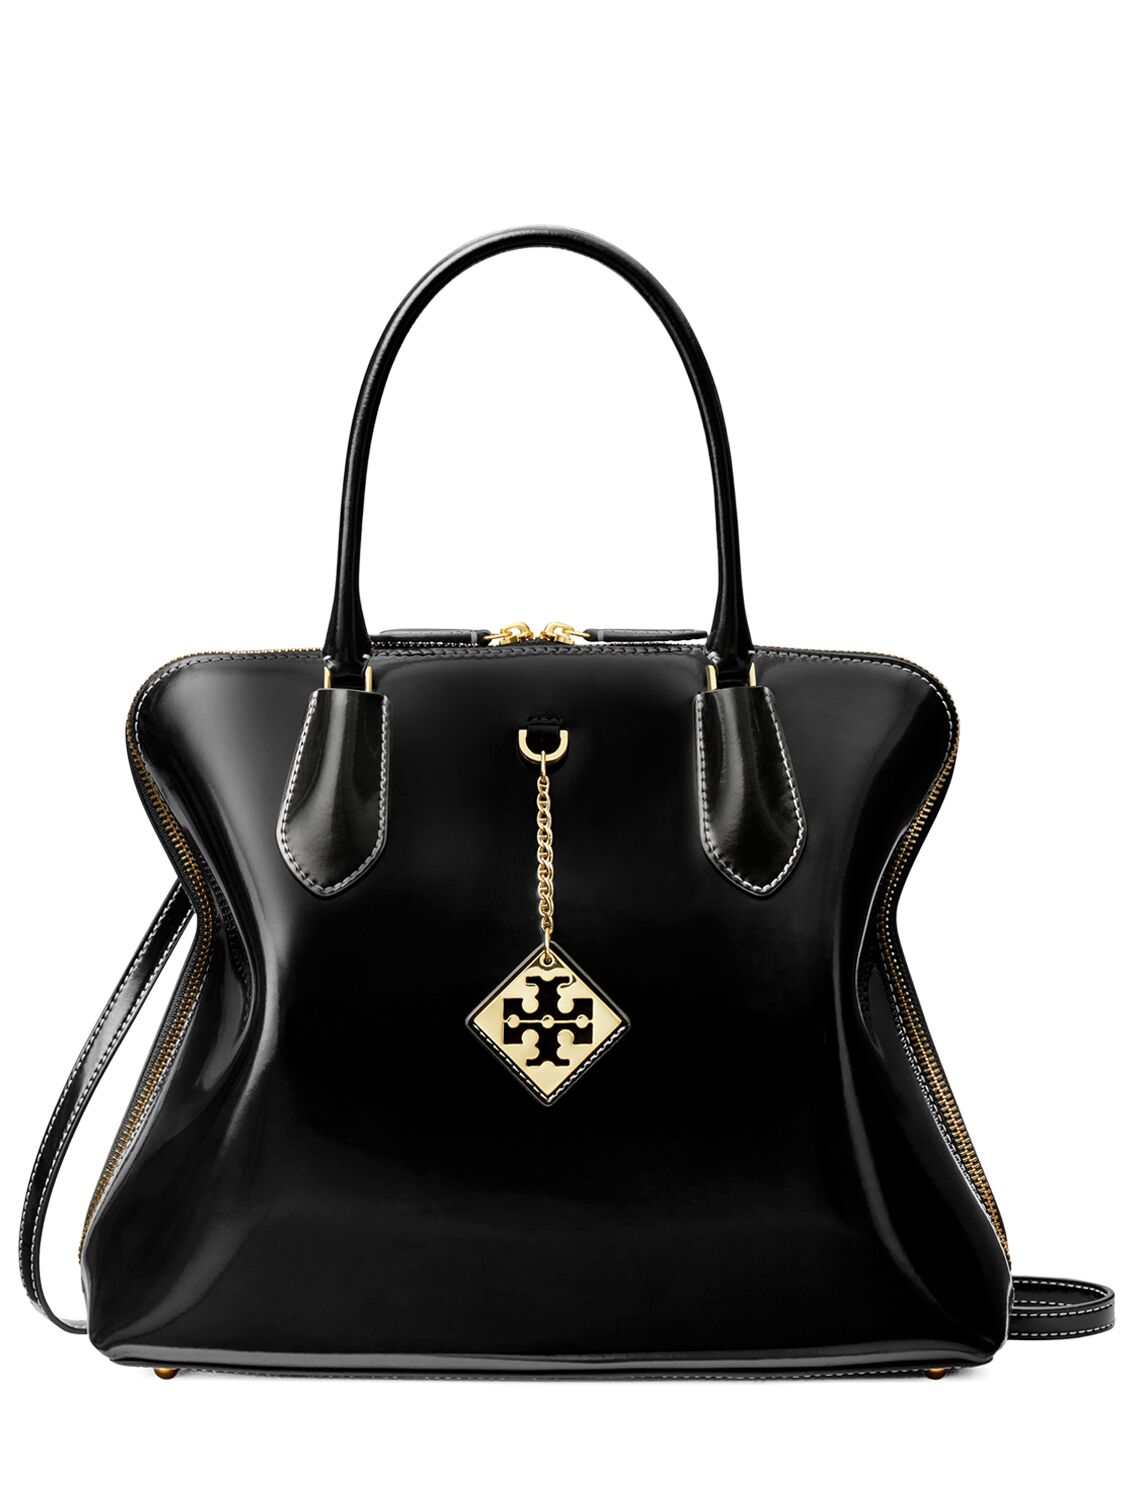 Tory Burch Polished Swing Leather Top Handle Bag In Black